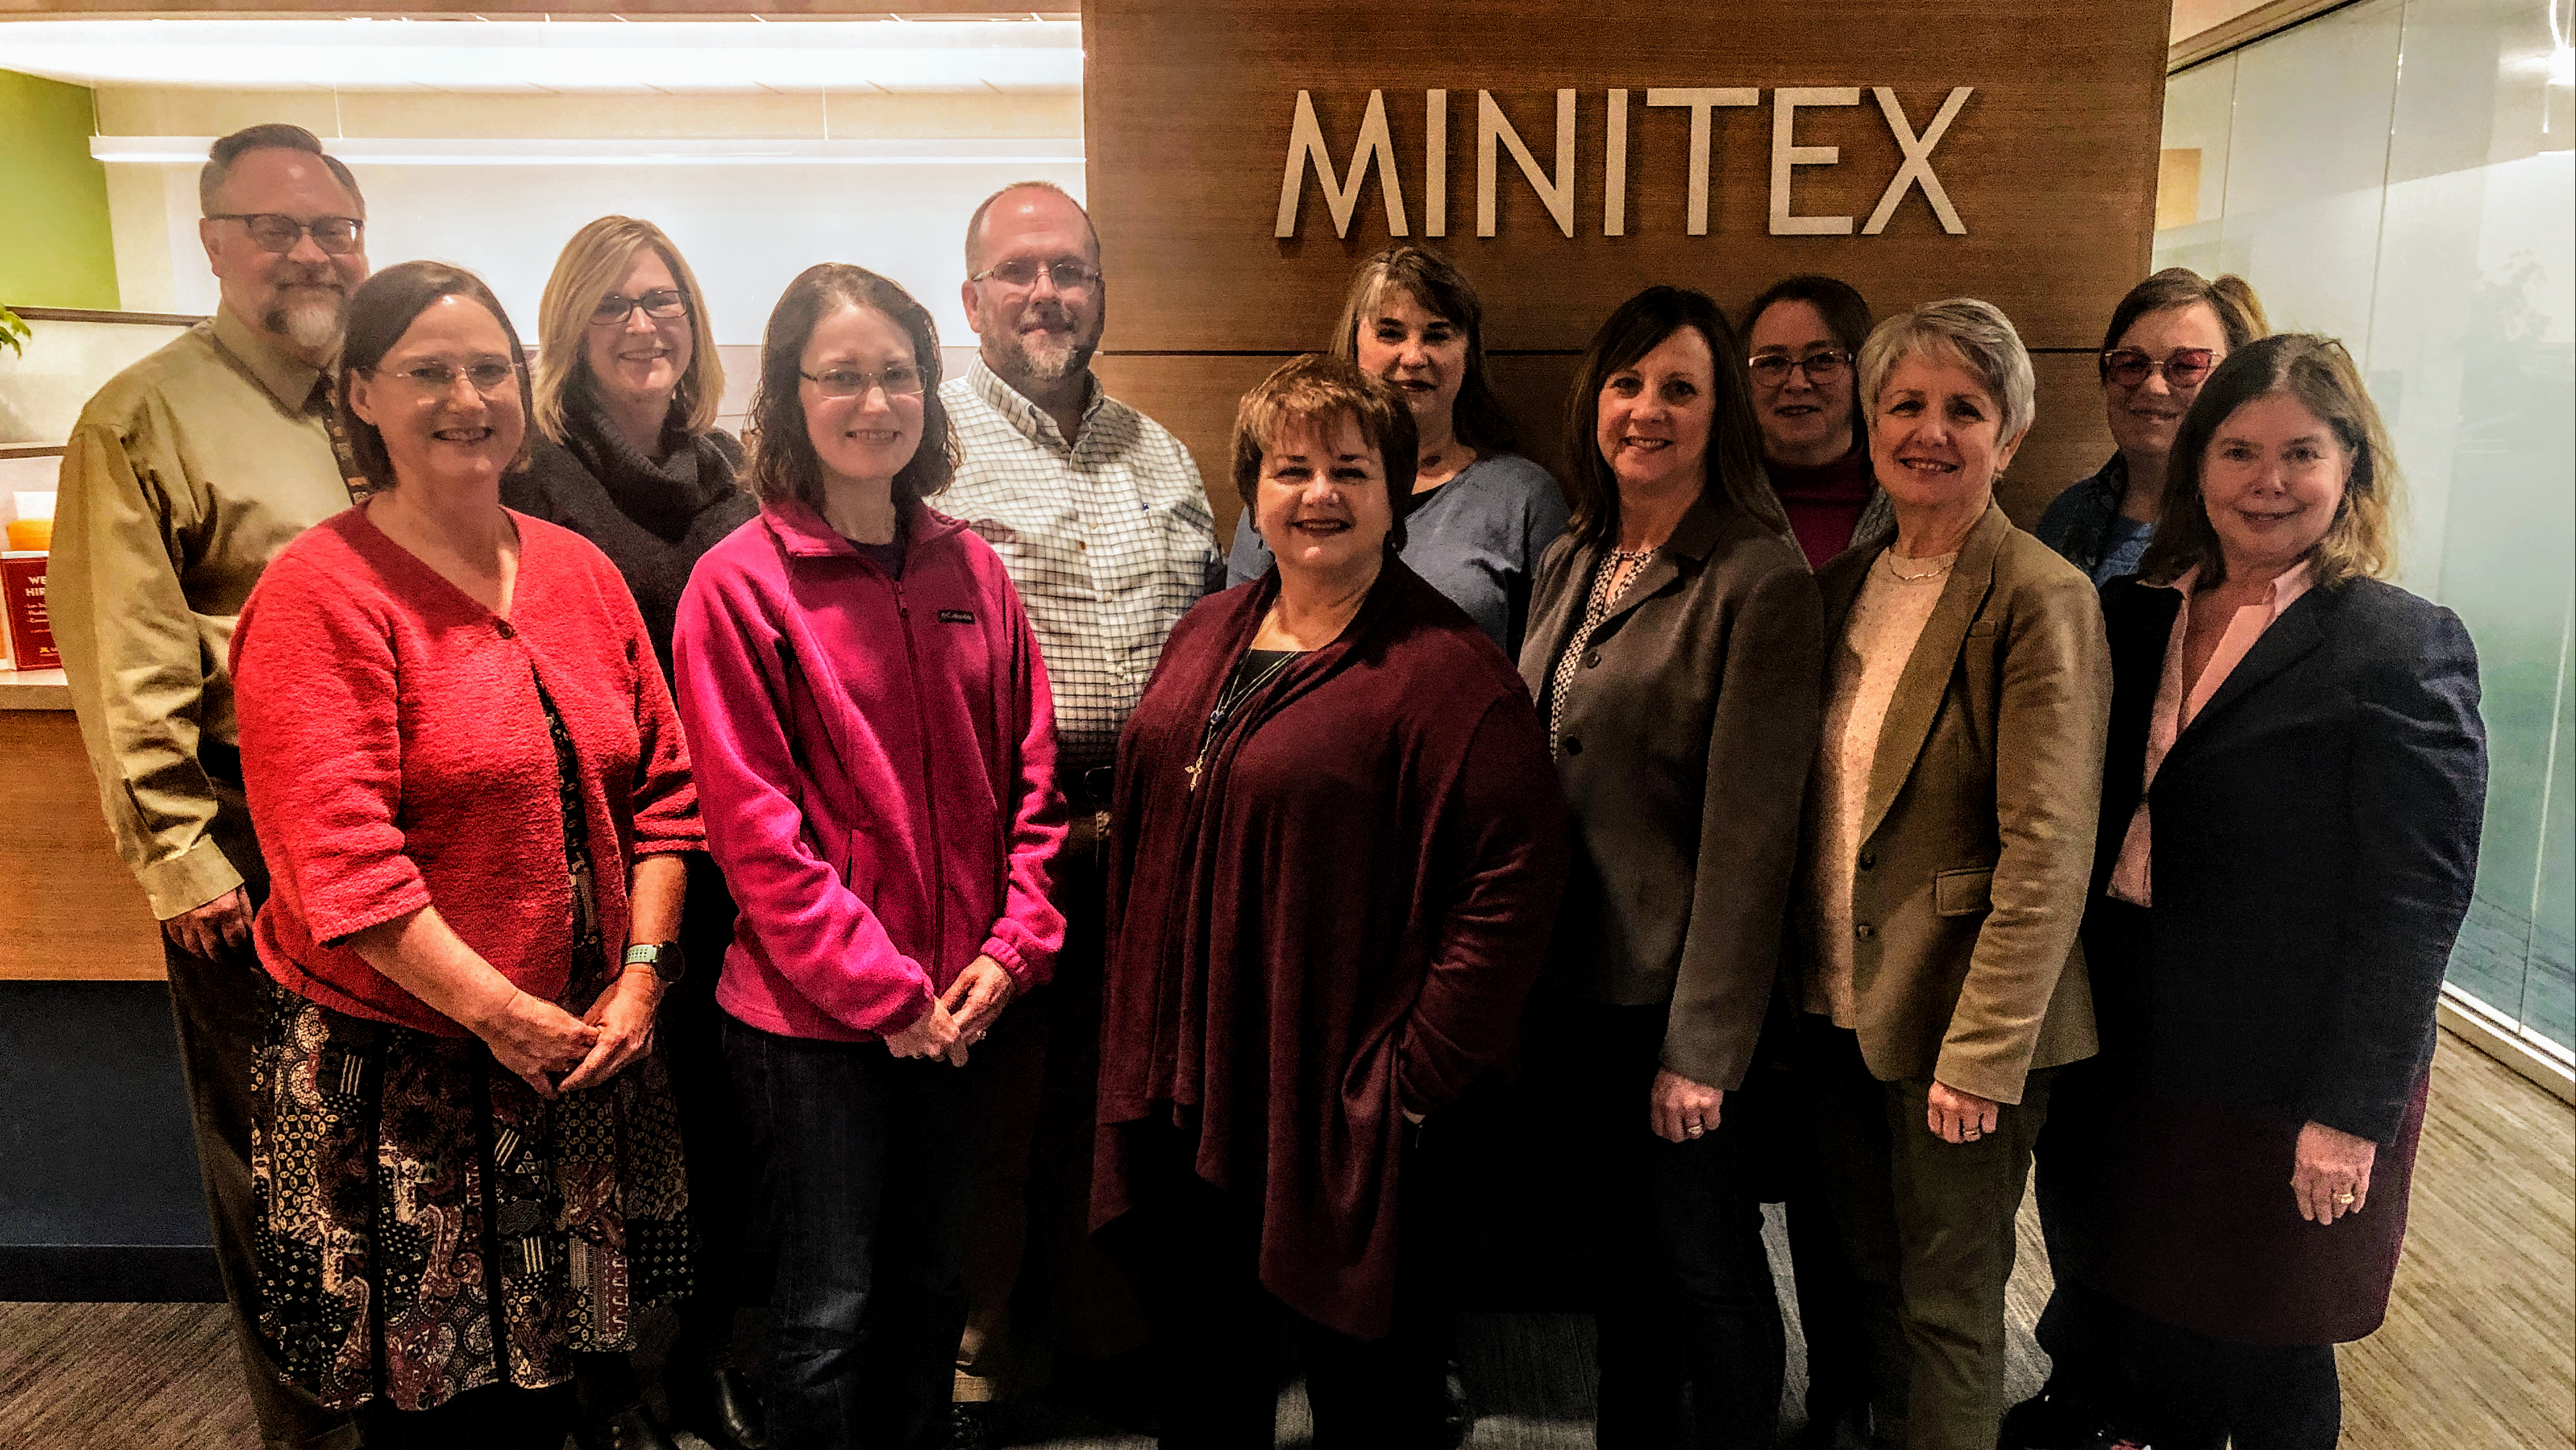 A photograph of Minitex Policy Advisory Council members taken in the front lobby of the Minitex offices.